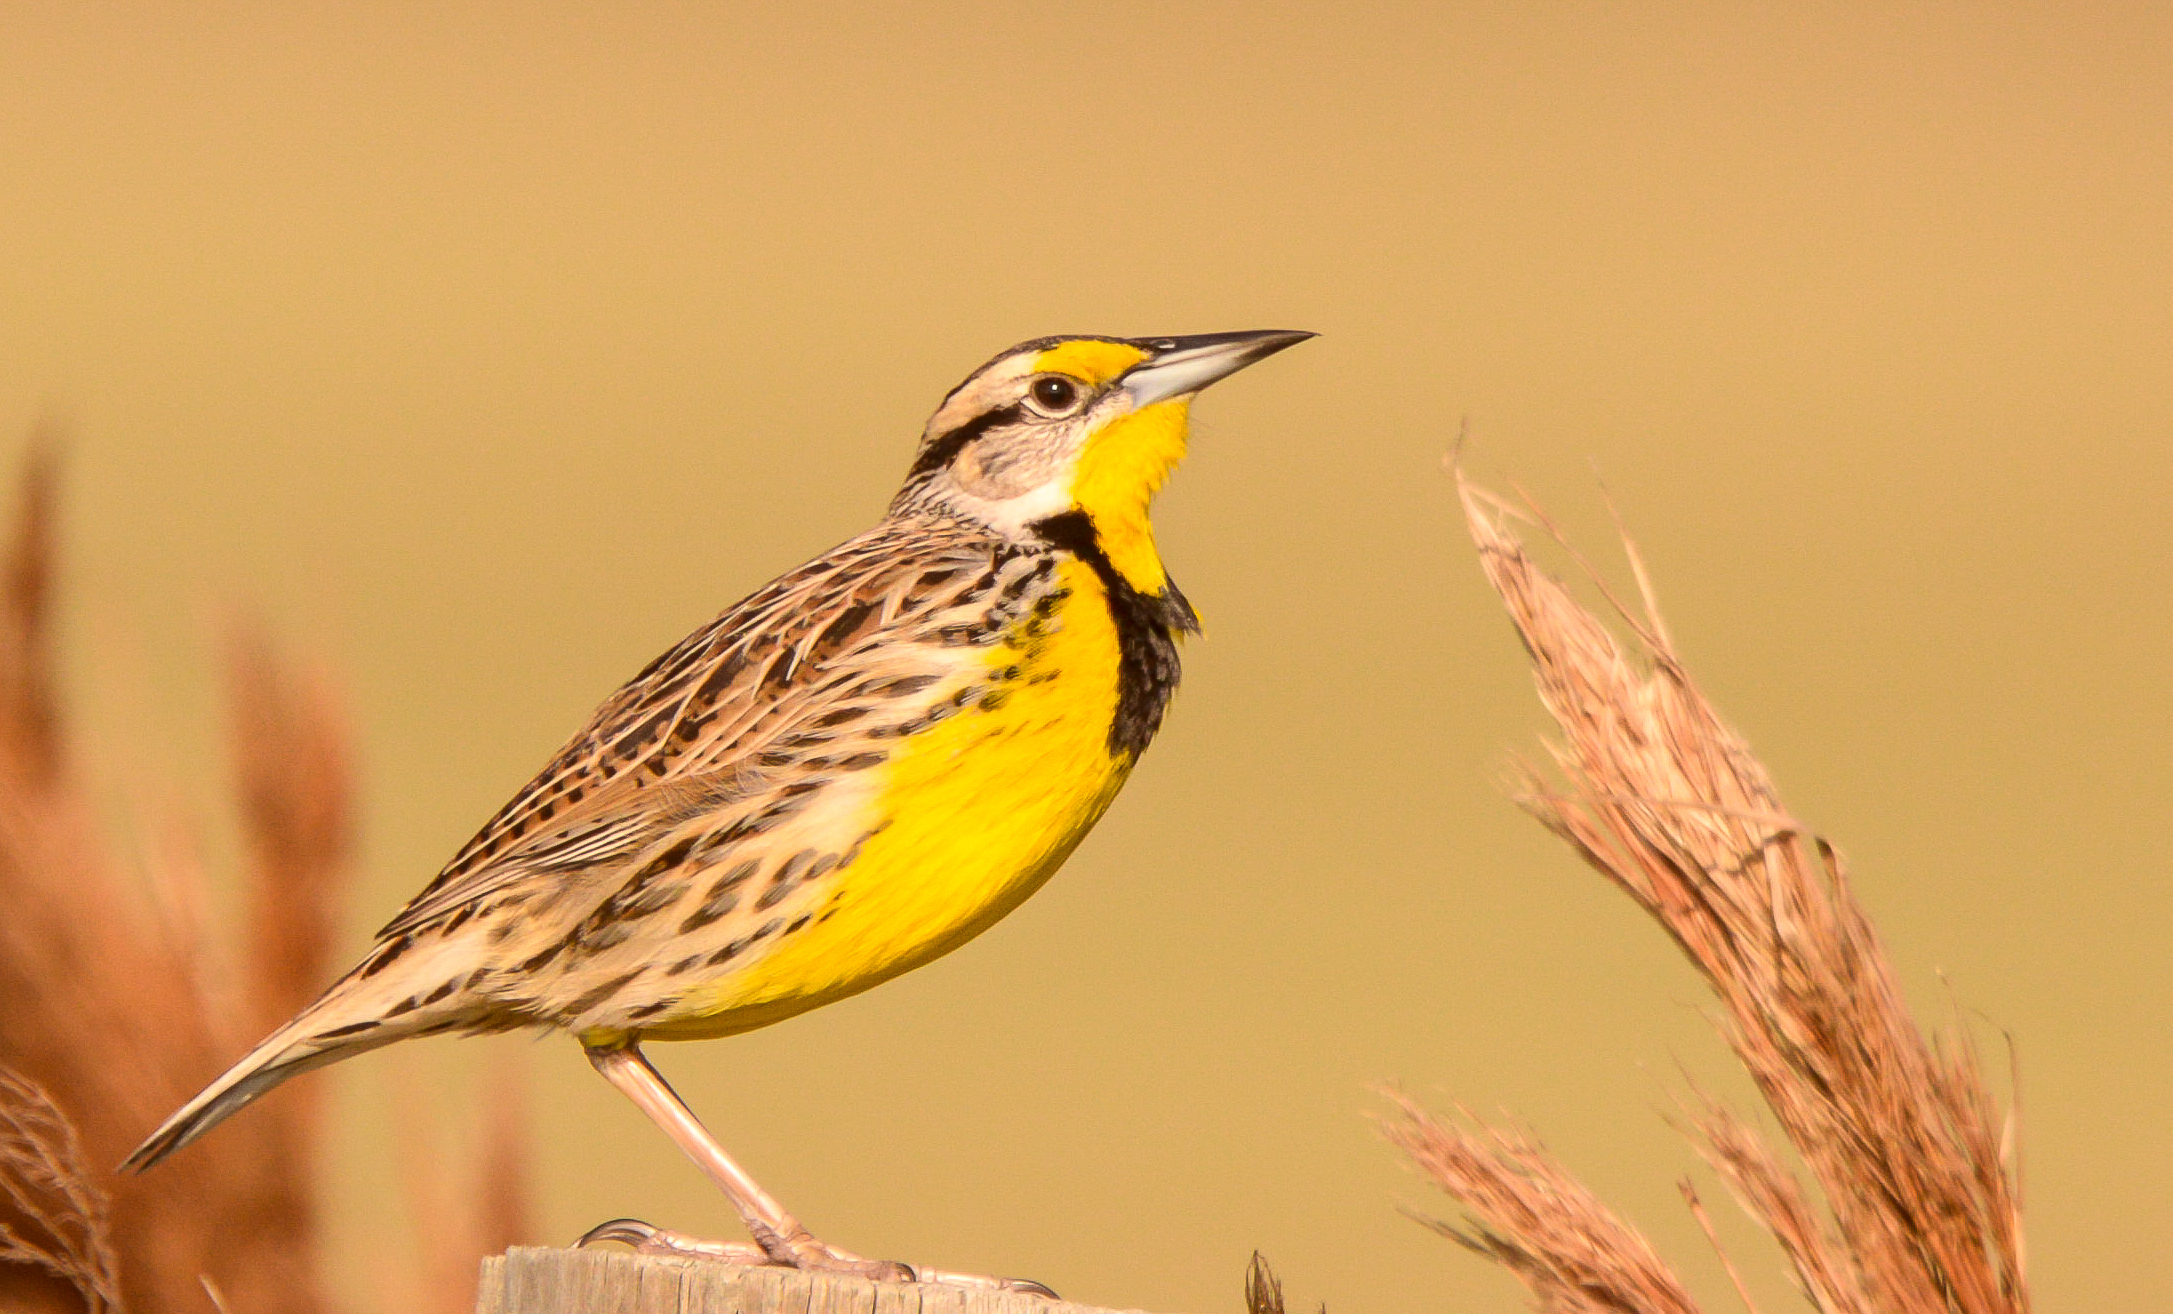 Eastern Meadowlark. <a href="https://www.flickr.com/photos/105596016@N07/32586344721" target="_blank" >Photo</a>: John Sutton/<a href="https://creativecommons.org/licenses/by-nc-nd/2.0/" target="_blank" >CC BY-NC-ND 2.0</a>